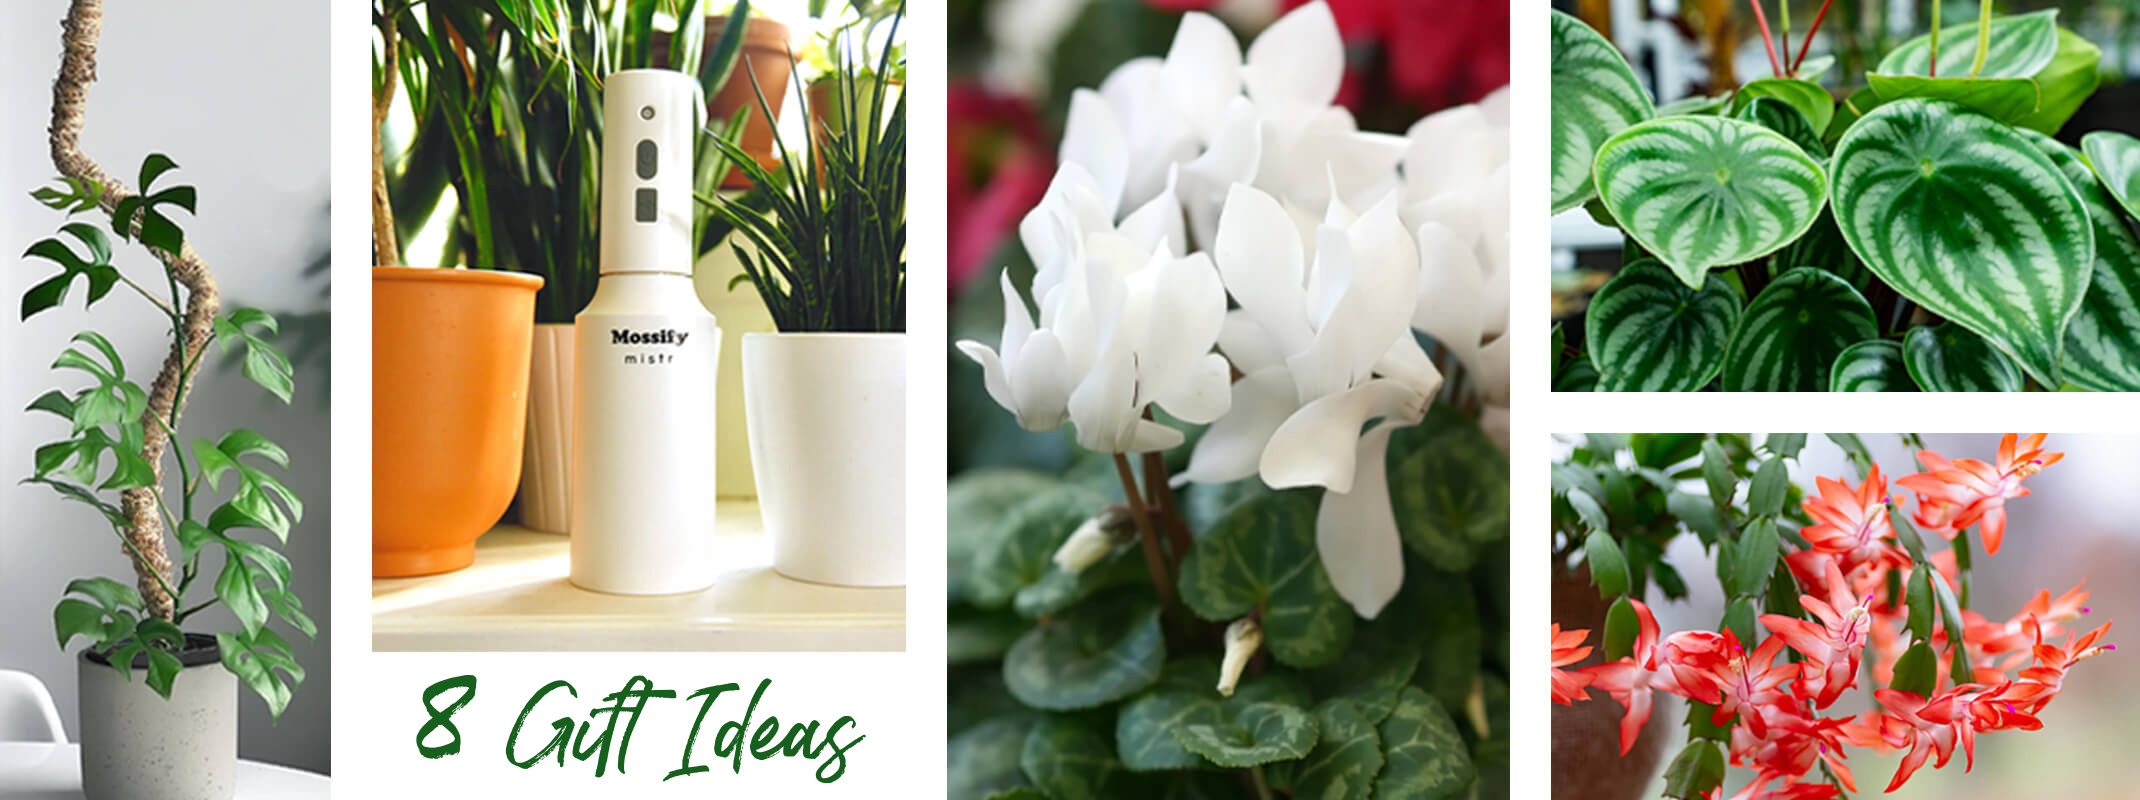 last minute holiday gift giving ideas including mossify, cyclamen and houseplants